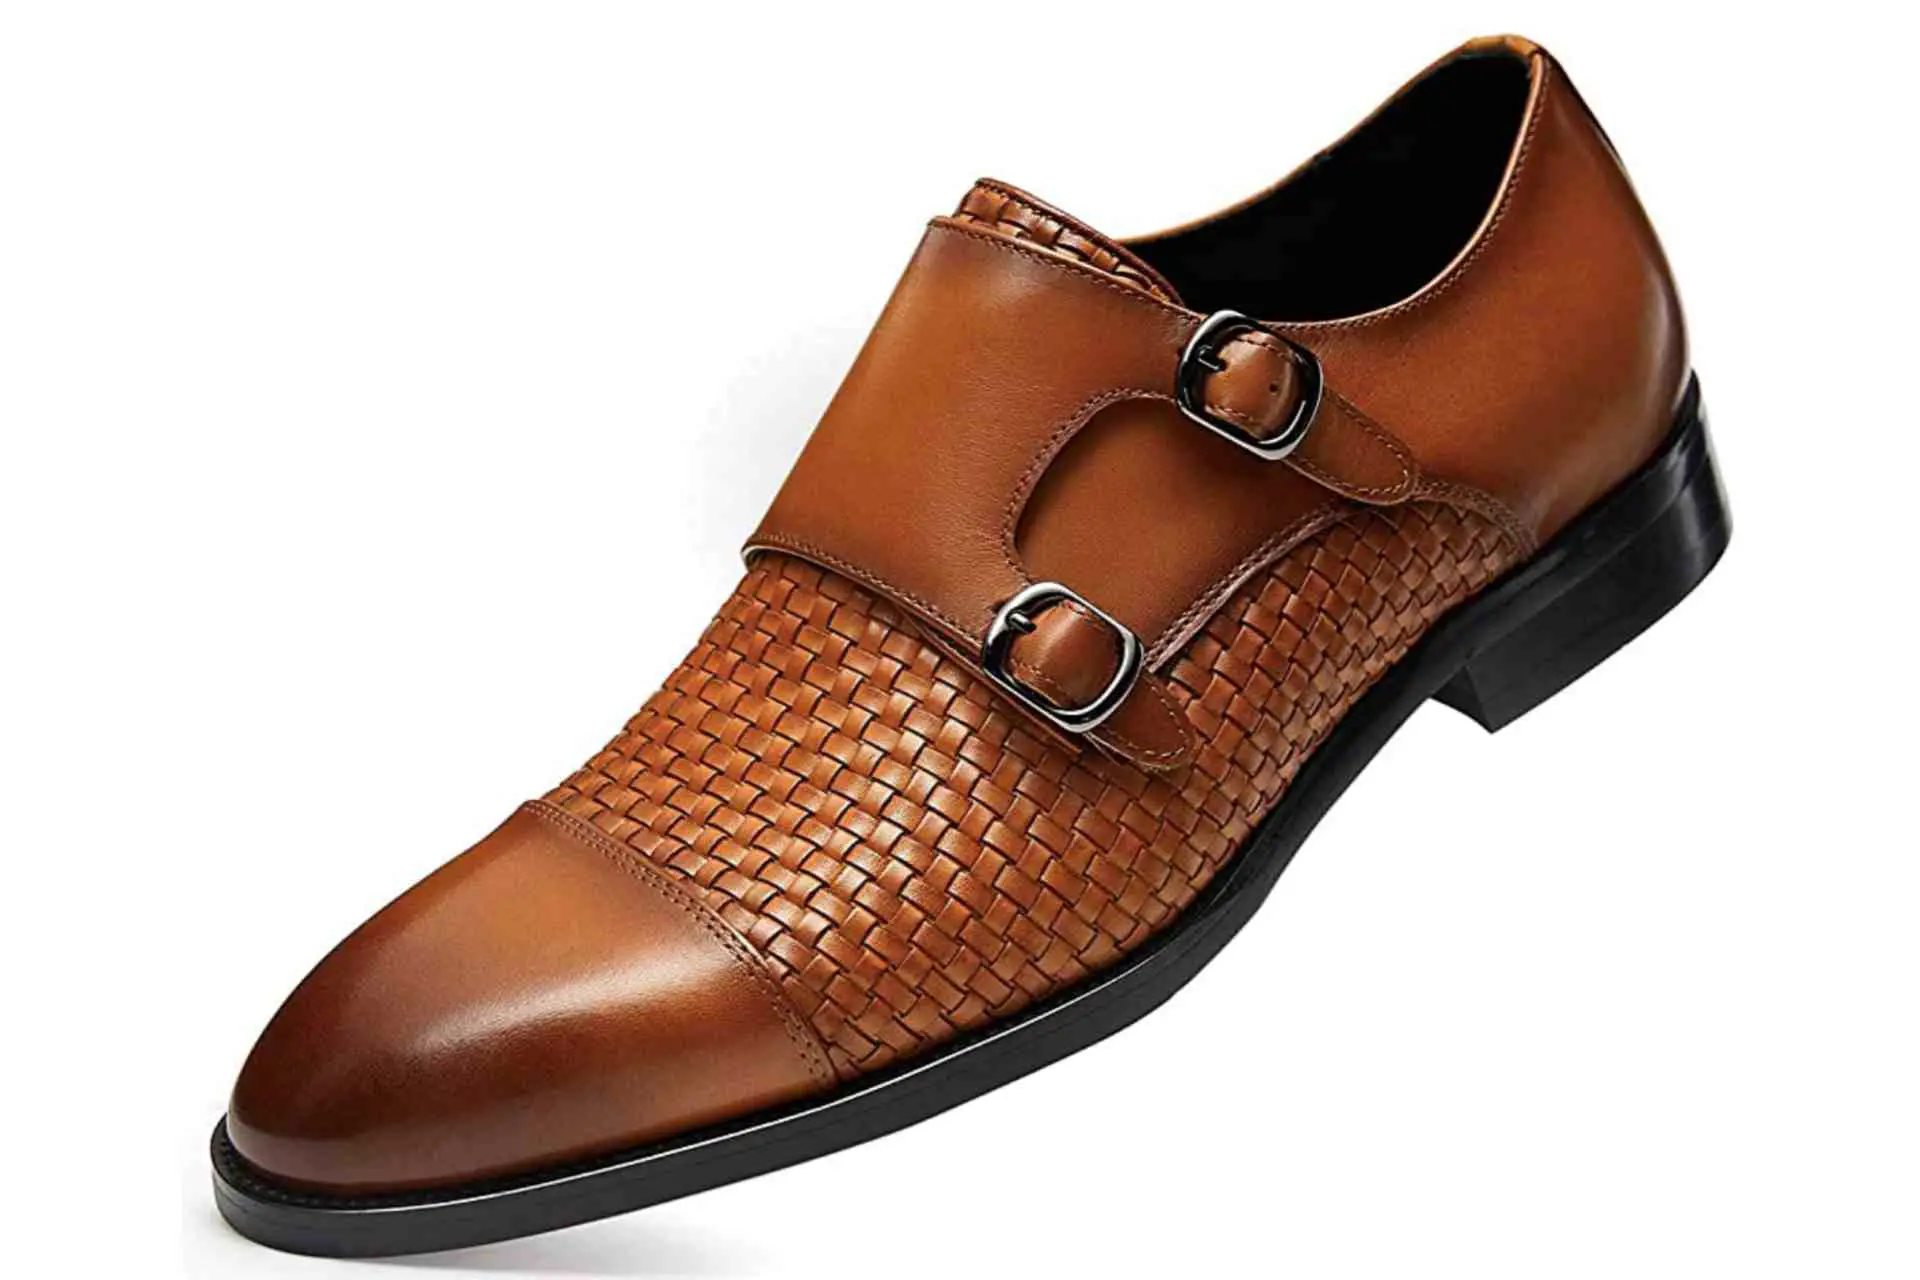 High-quality brown leather Monk Strap shoes for men